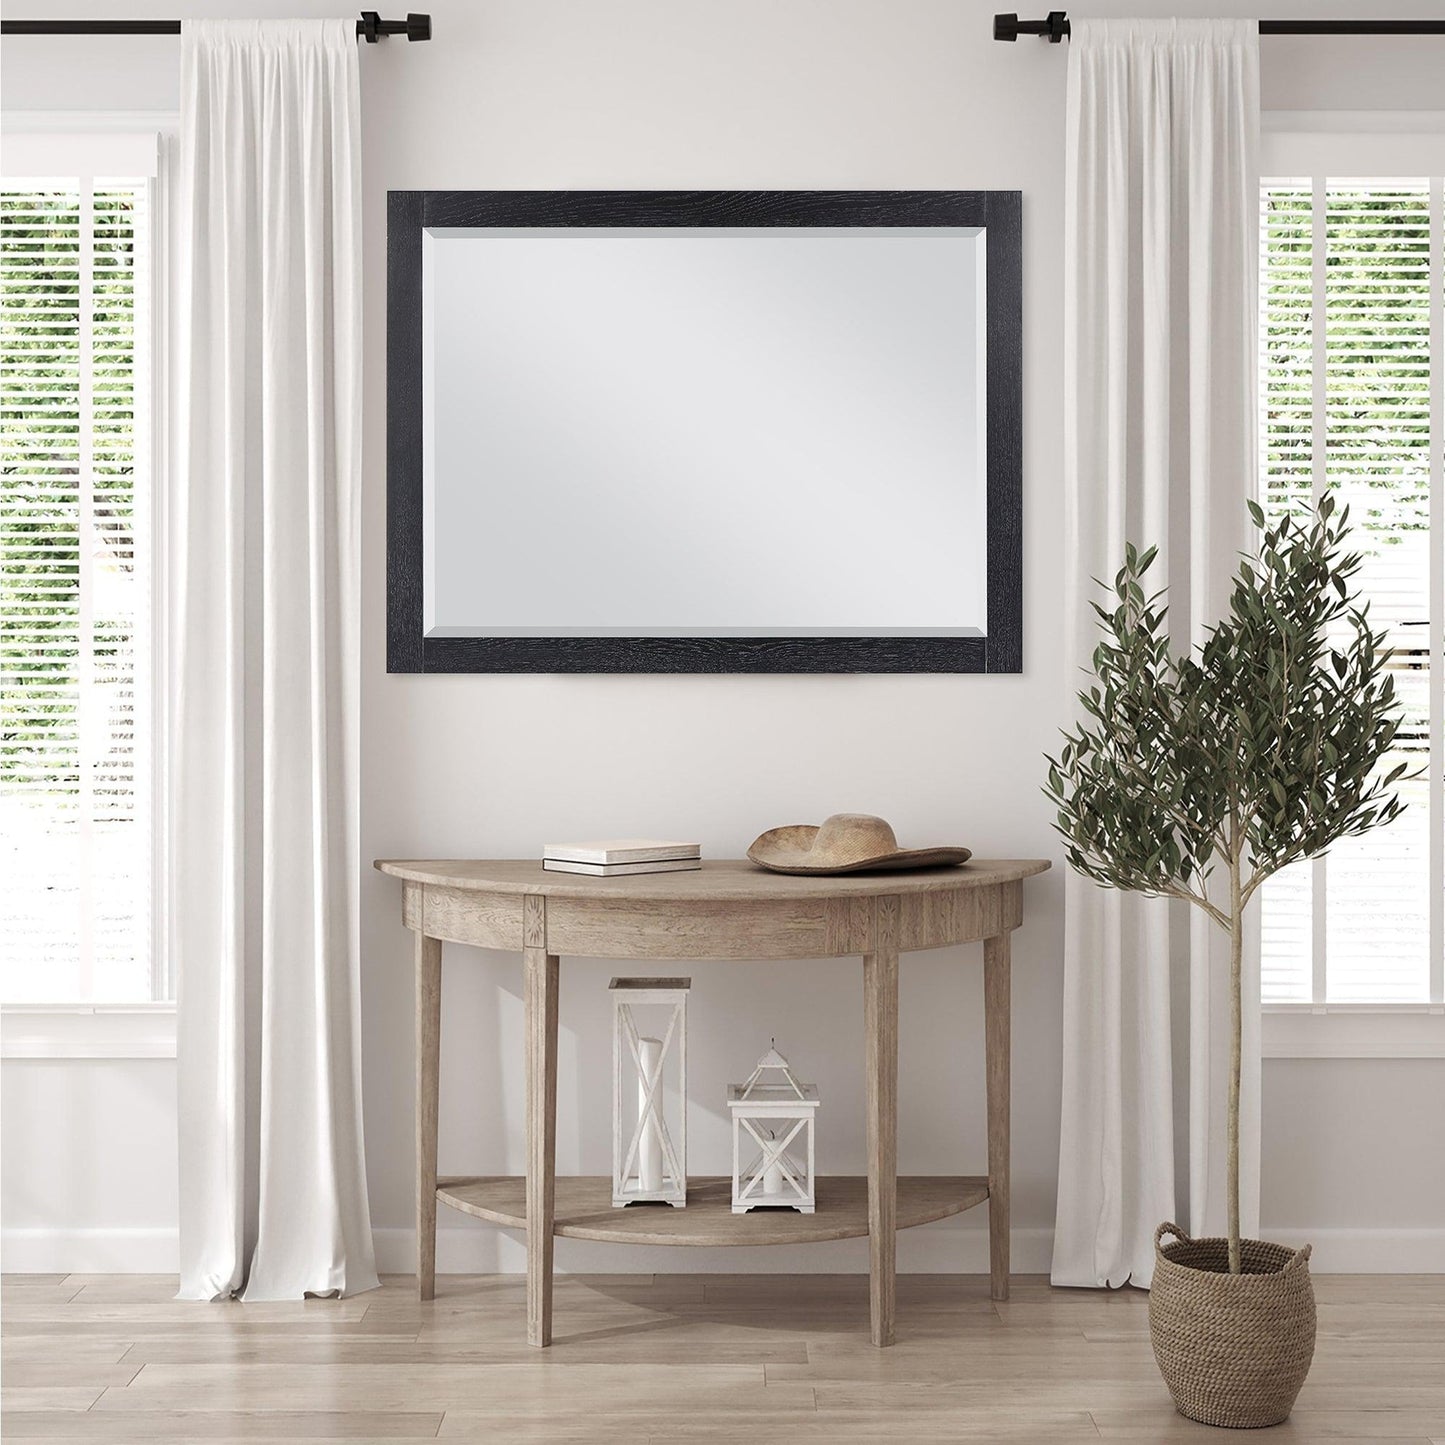 Altair Ivy 48" x 36" Rectangle Black Oak Wood Framed Wall-Mounted Mirror